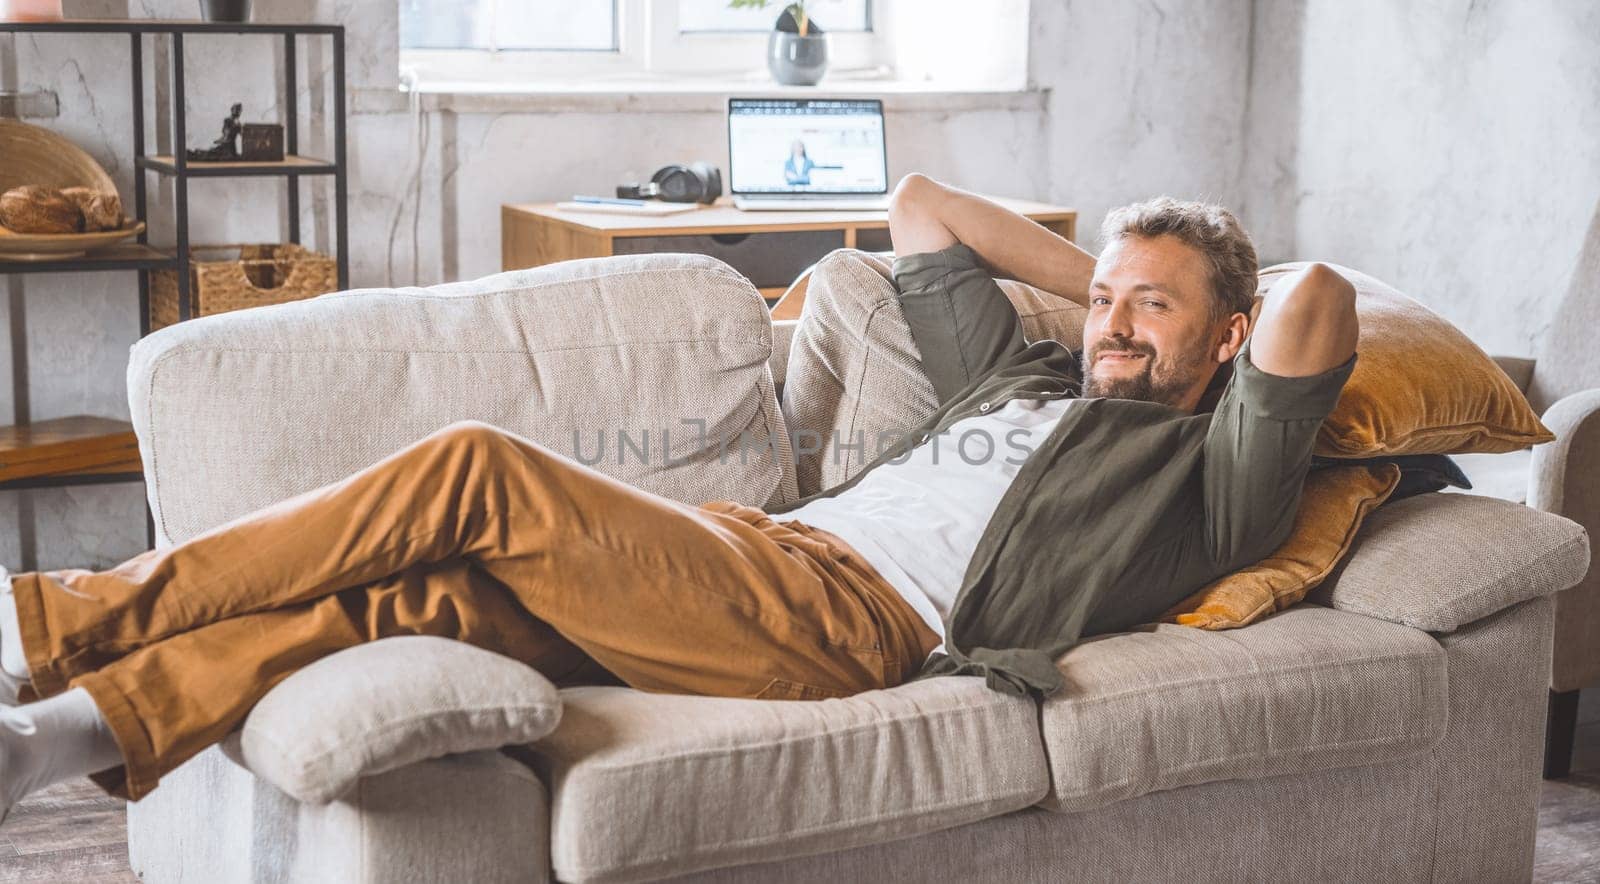 Man enjoying peaceful moment home, laying comfortably on sofa. Concept of freelancing and working from home, which has become increasingly popular in recent years. Handsome spent time home. by LipikStockMedia